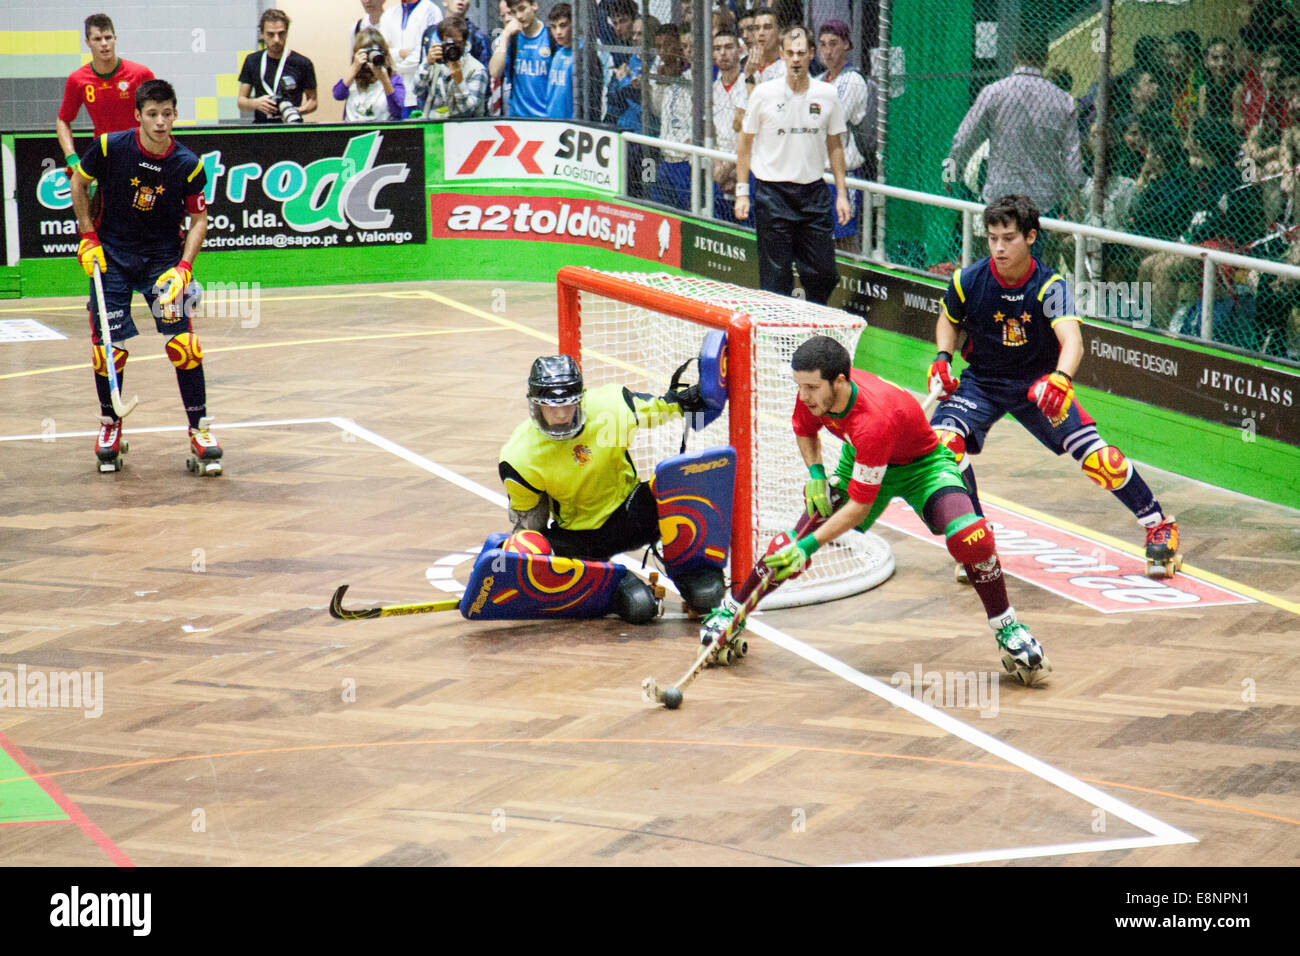 Valongo, Portugal. 11th October, 2014. u20 European Roller Hockey  Championships 11th October 2014 Valongo, Portugal Won by Portugal who beat  Spain 4-3 in the final. Credit: Jeremy Pembrey/Alamy Live News Stock Photo  - Alamy